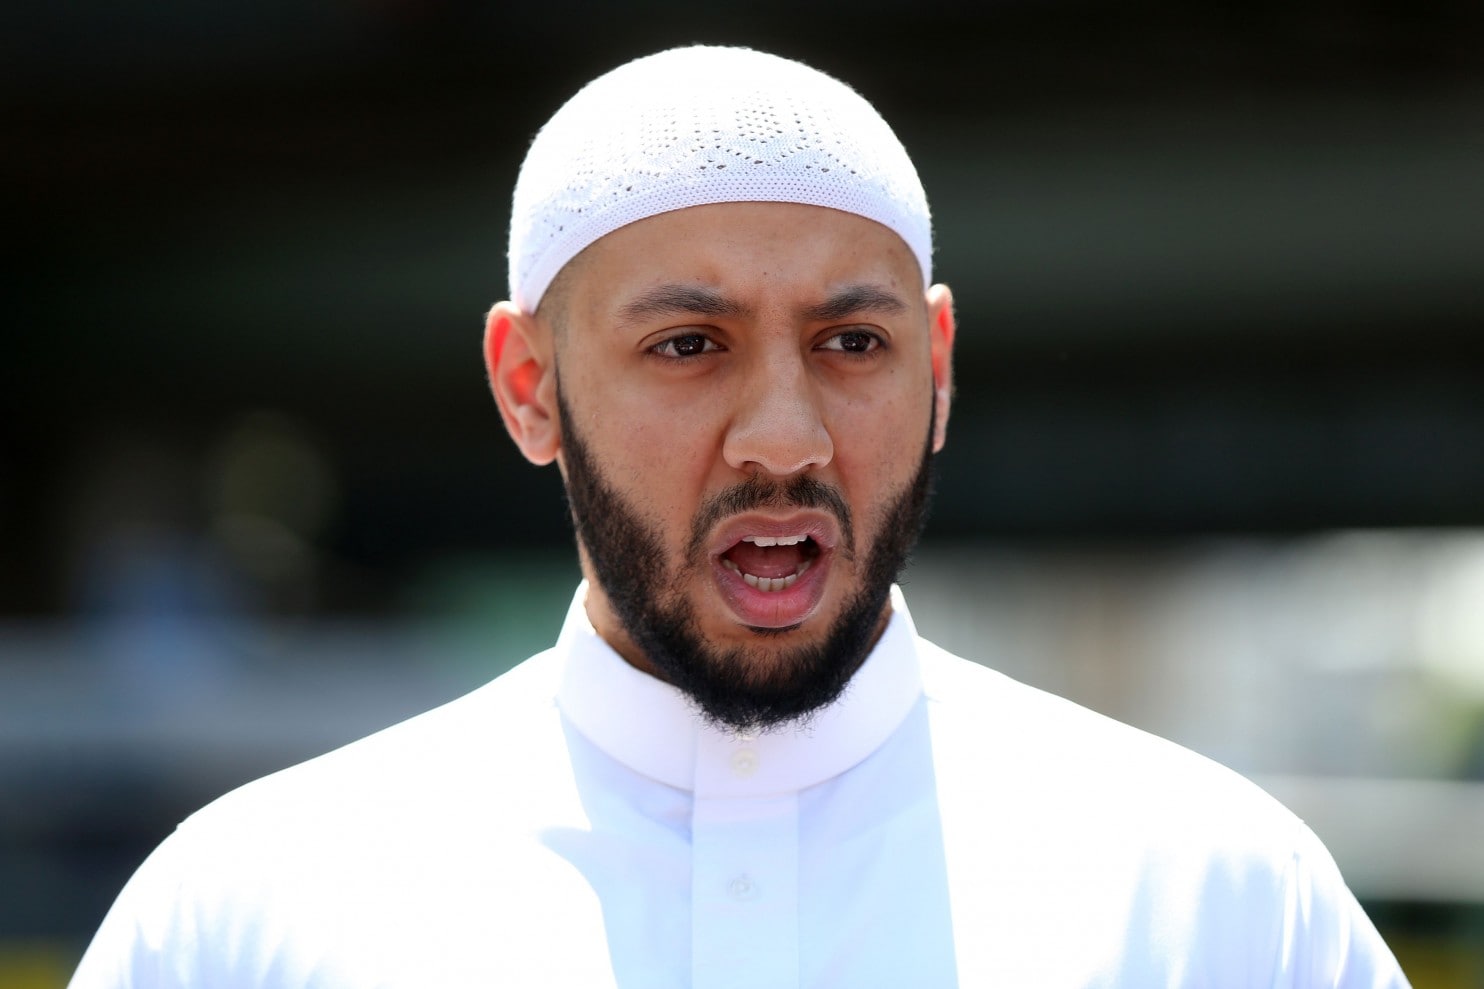 After an attacker targeted Muslims in London’s Finsbury Park, a local imam may have saved his life